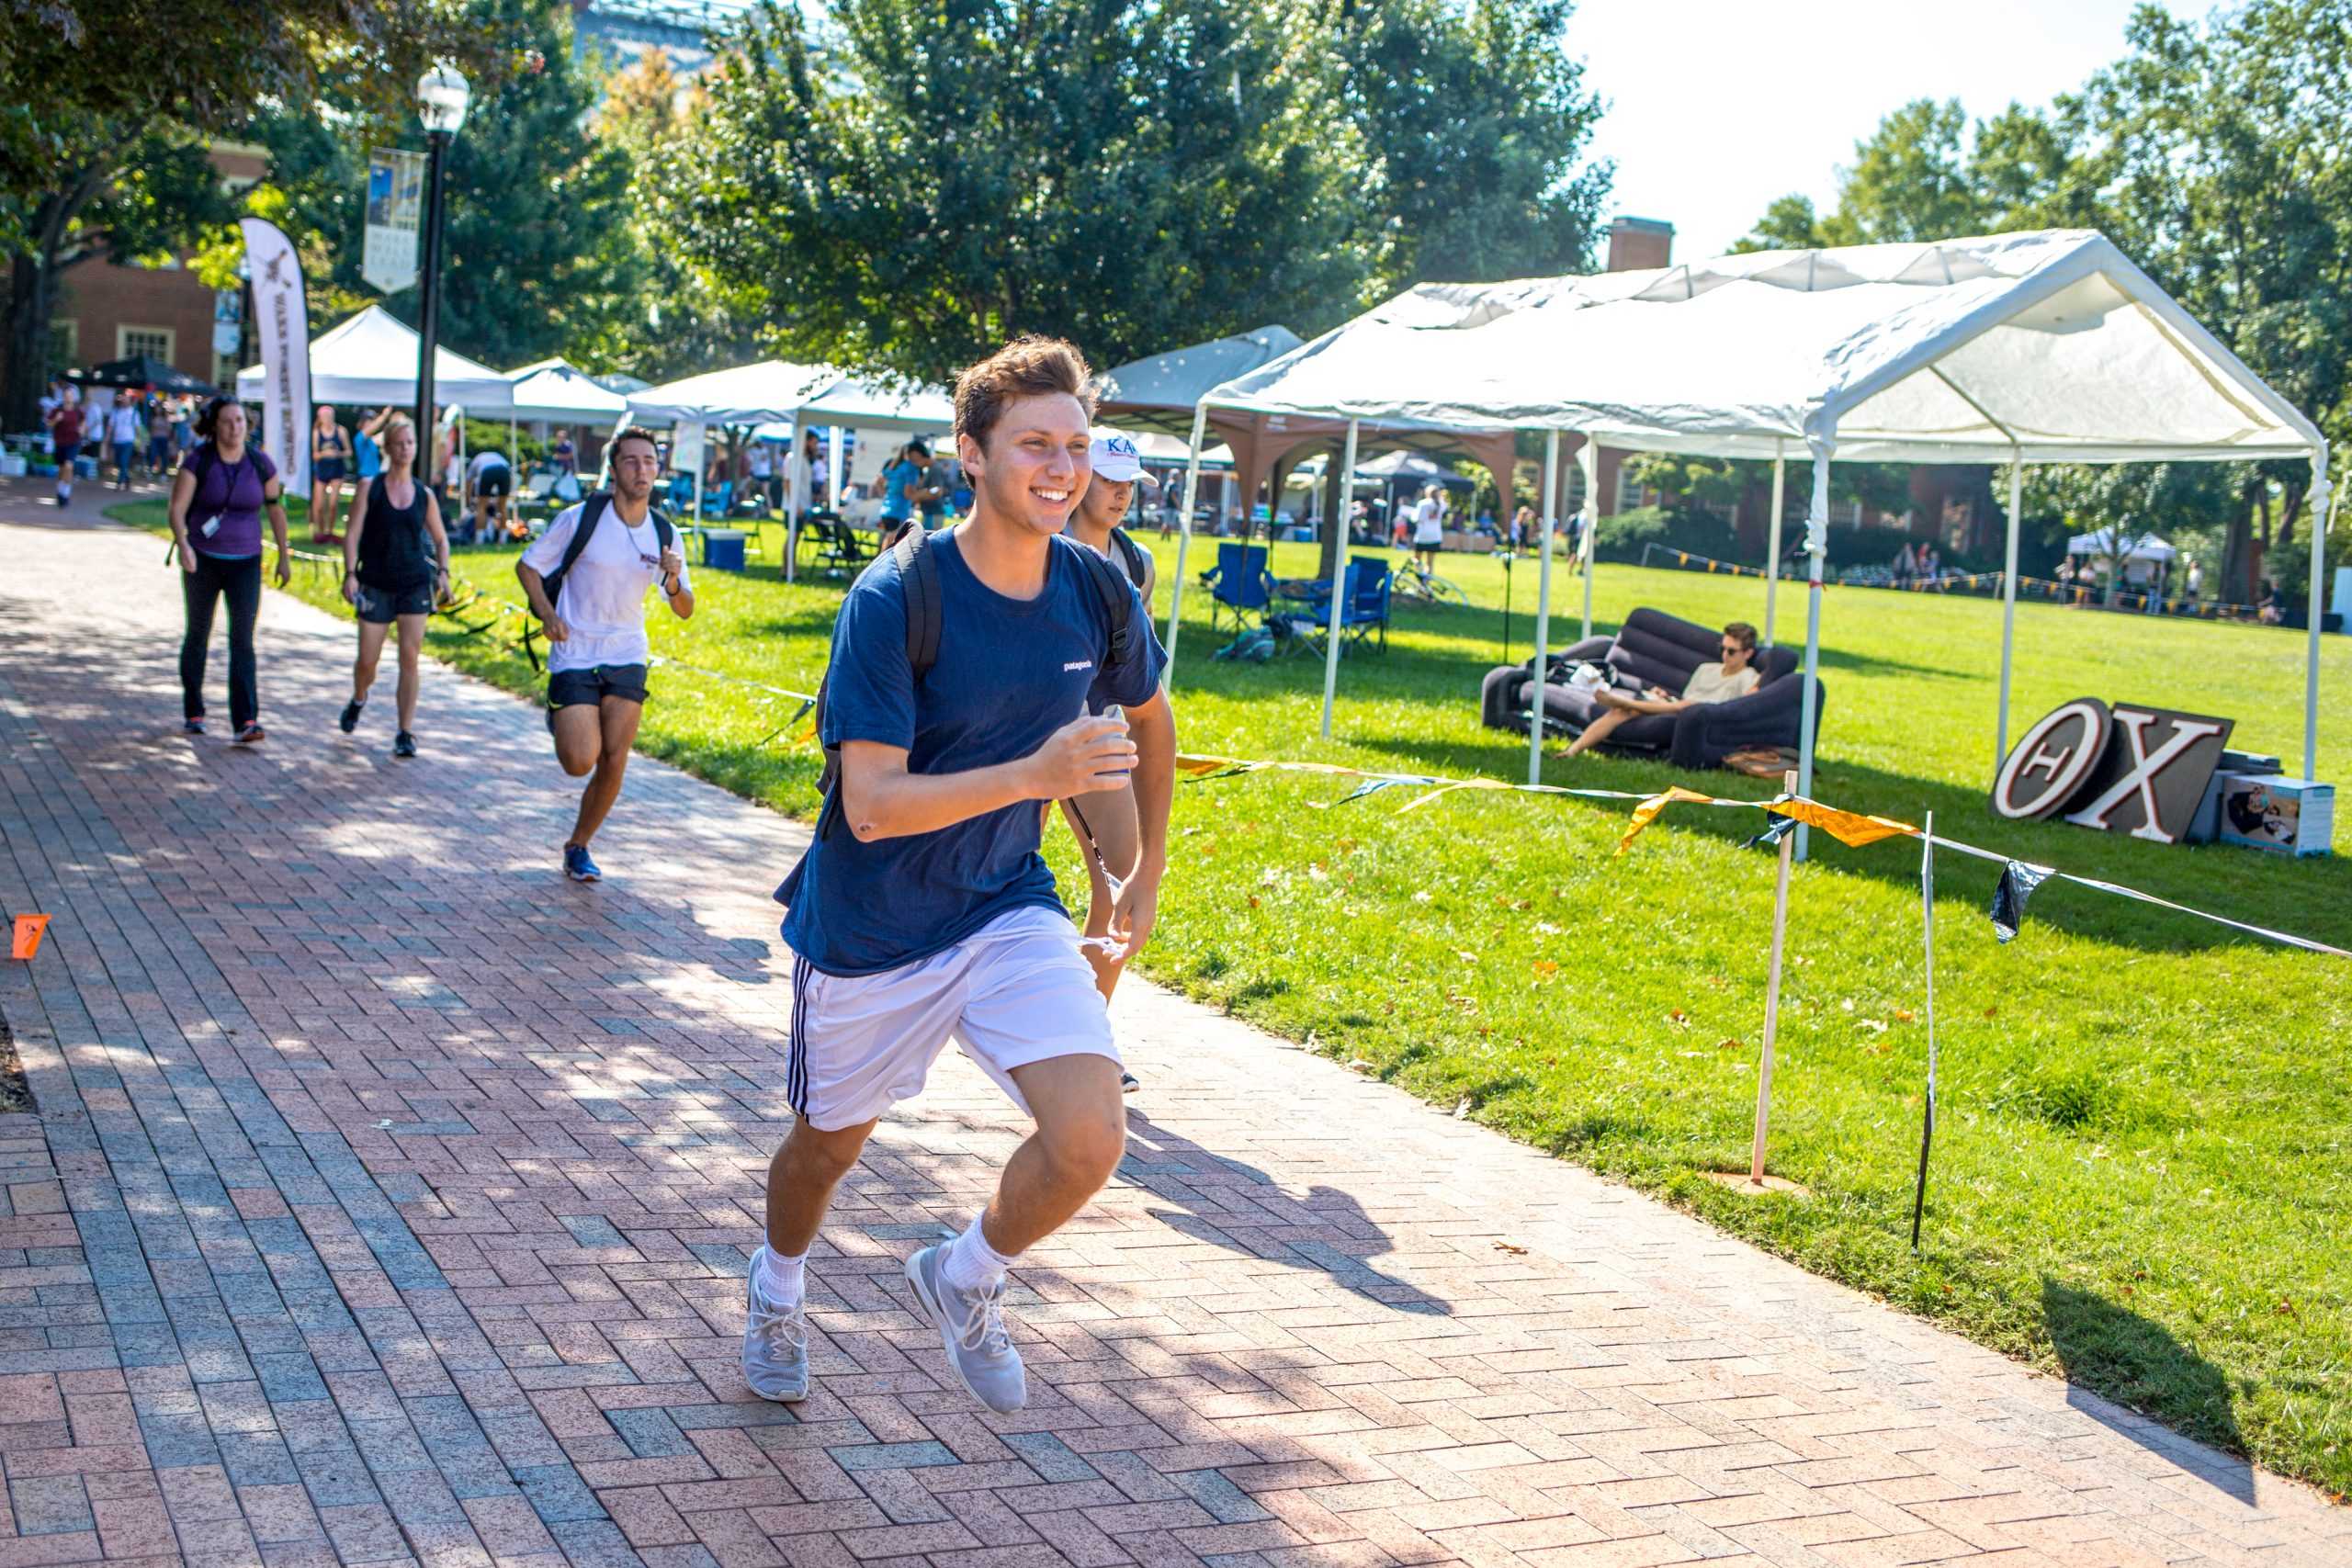 Students, staff and faculty have fun running laps on Hearn Plaza in Hit the Bricks.